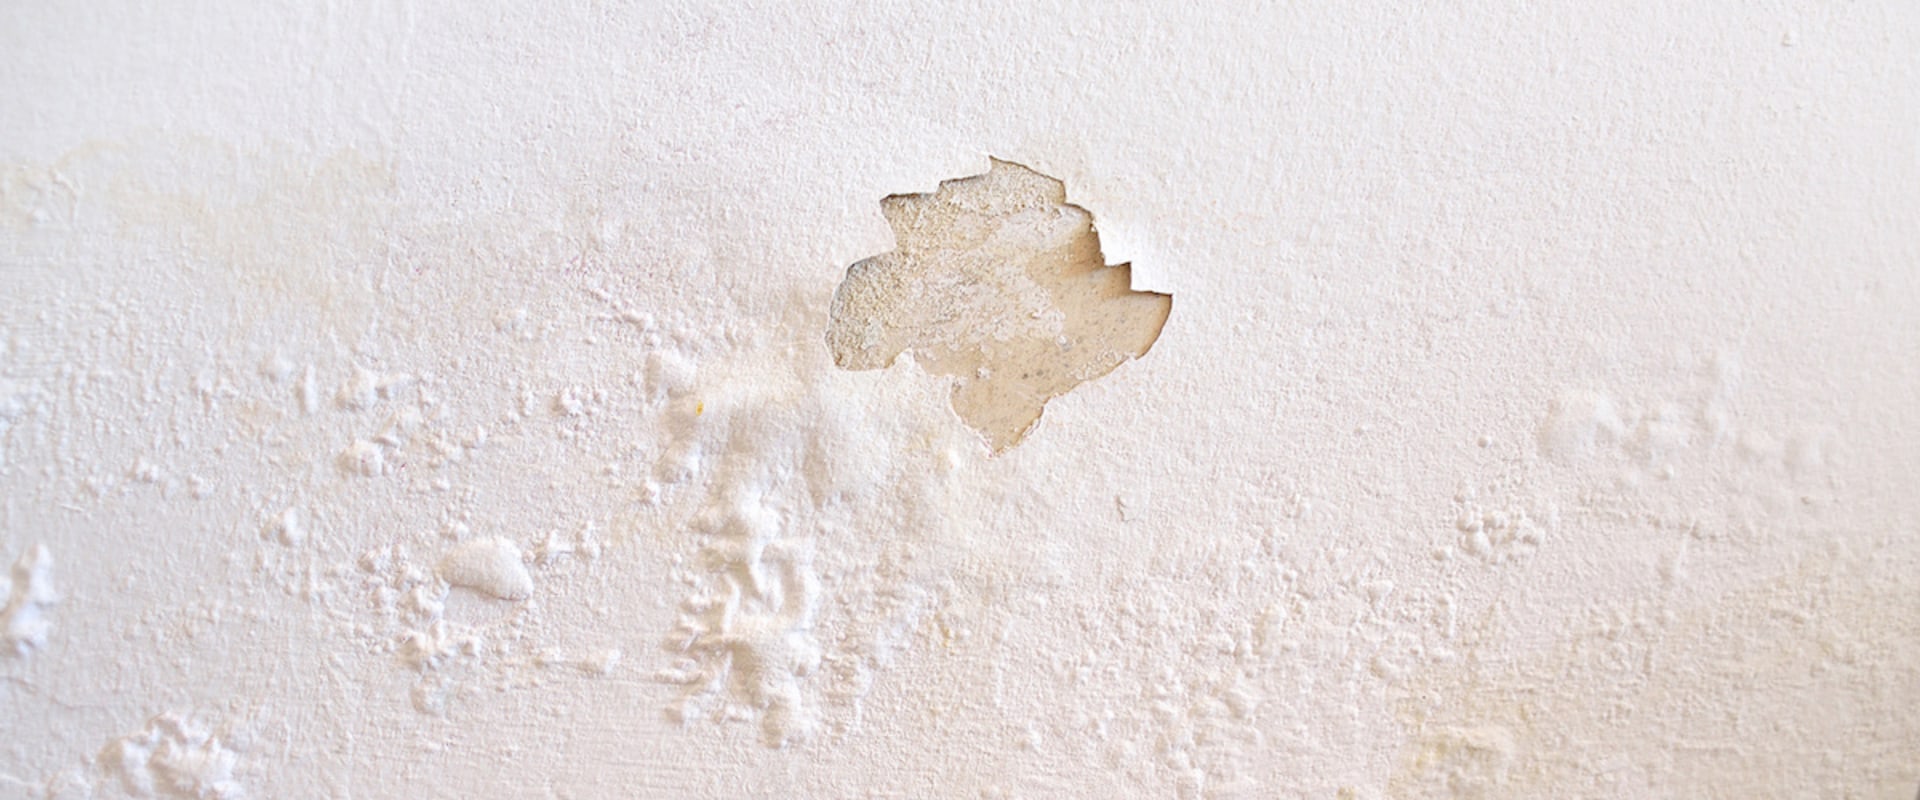 How to Dry Water Damage in Walls: 10 Easy Steps